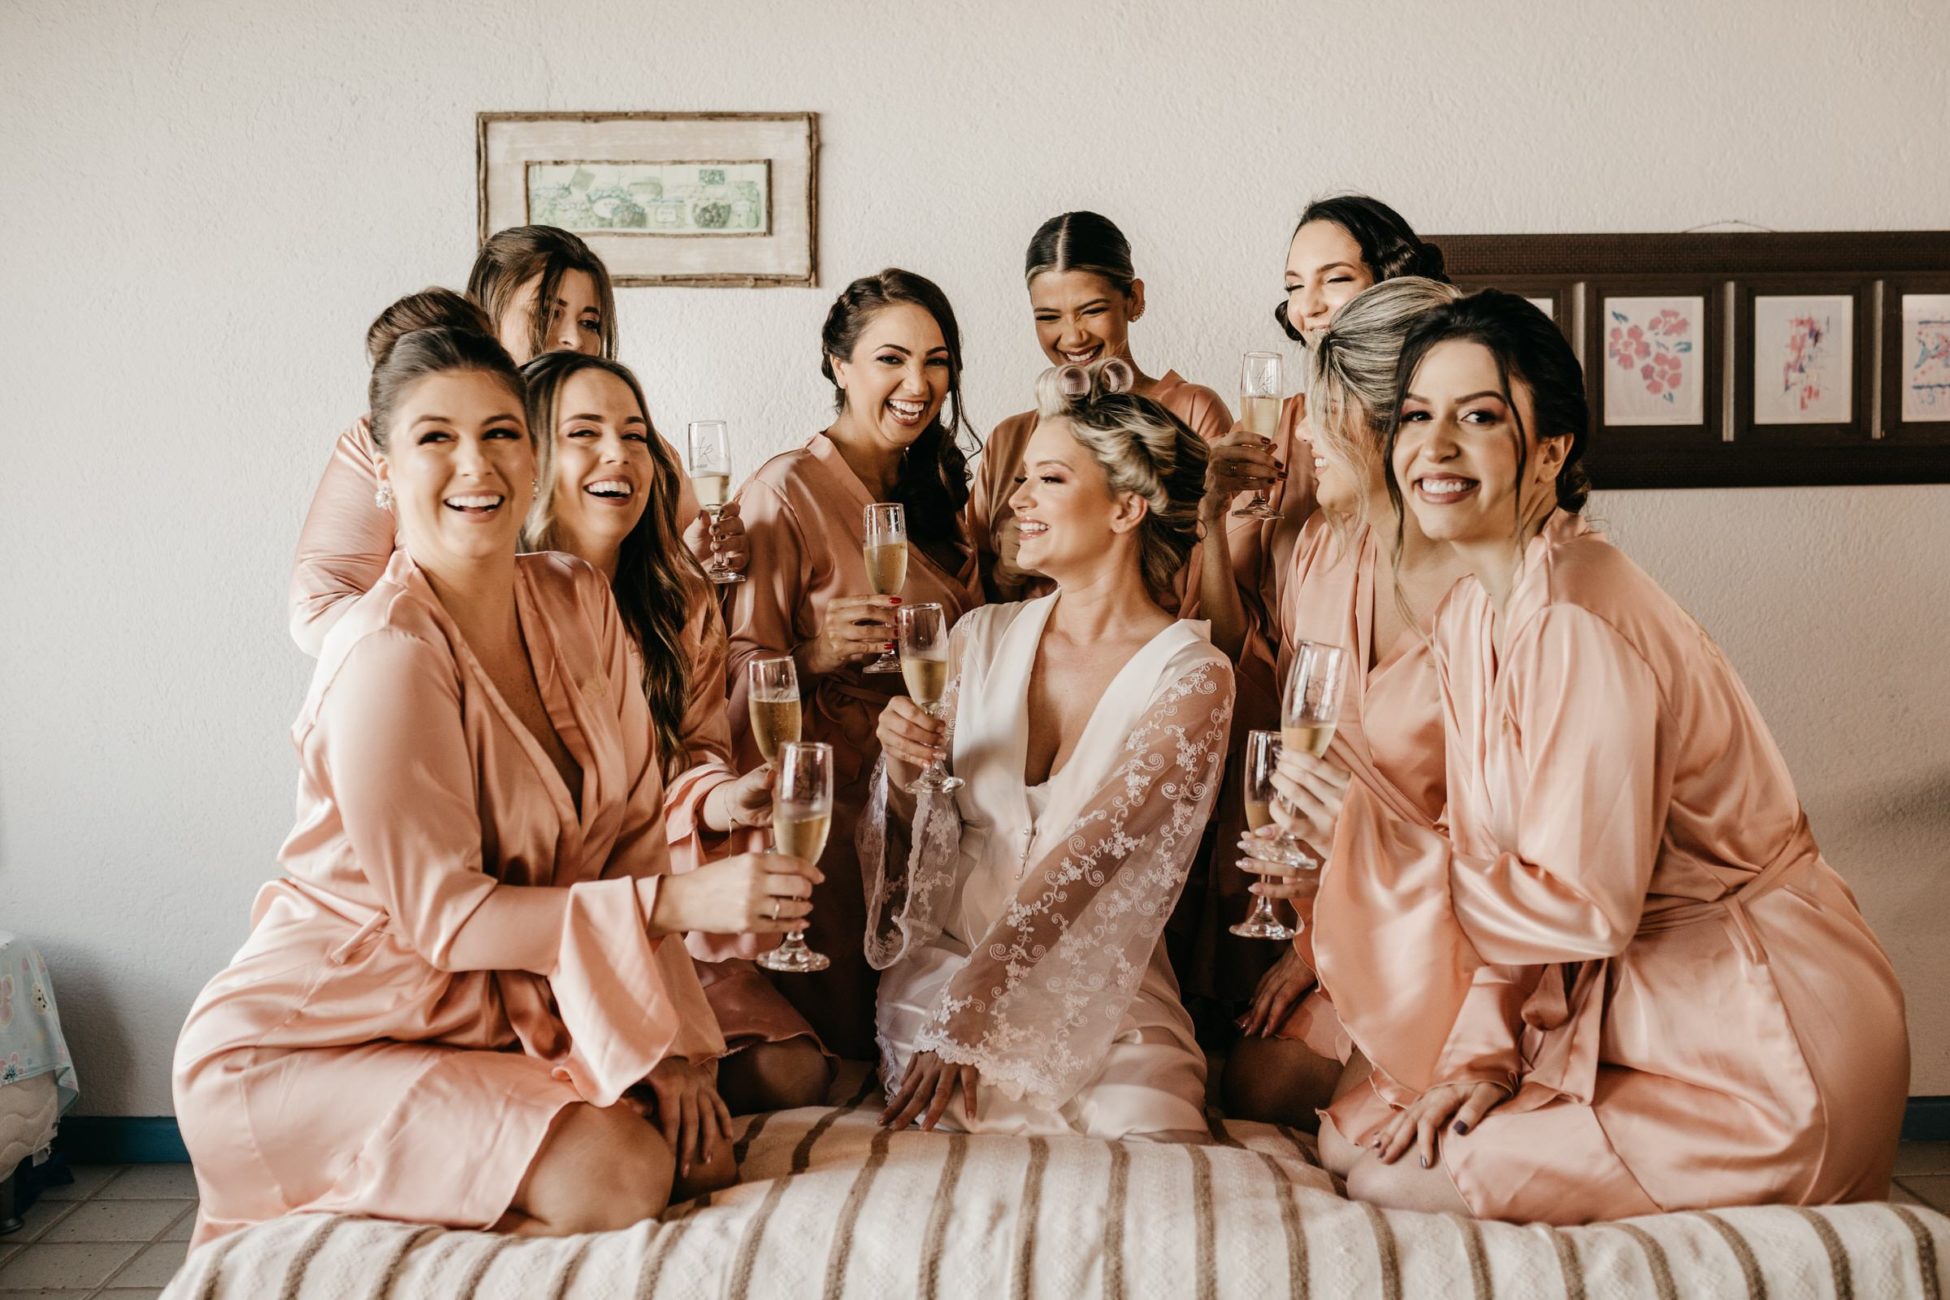 Bridal party in champagne color toasting before the wedding